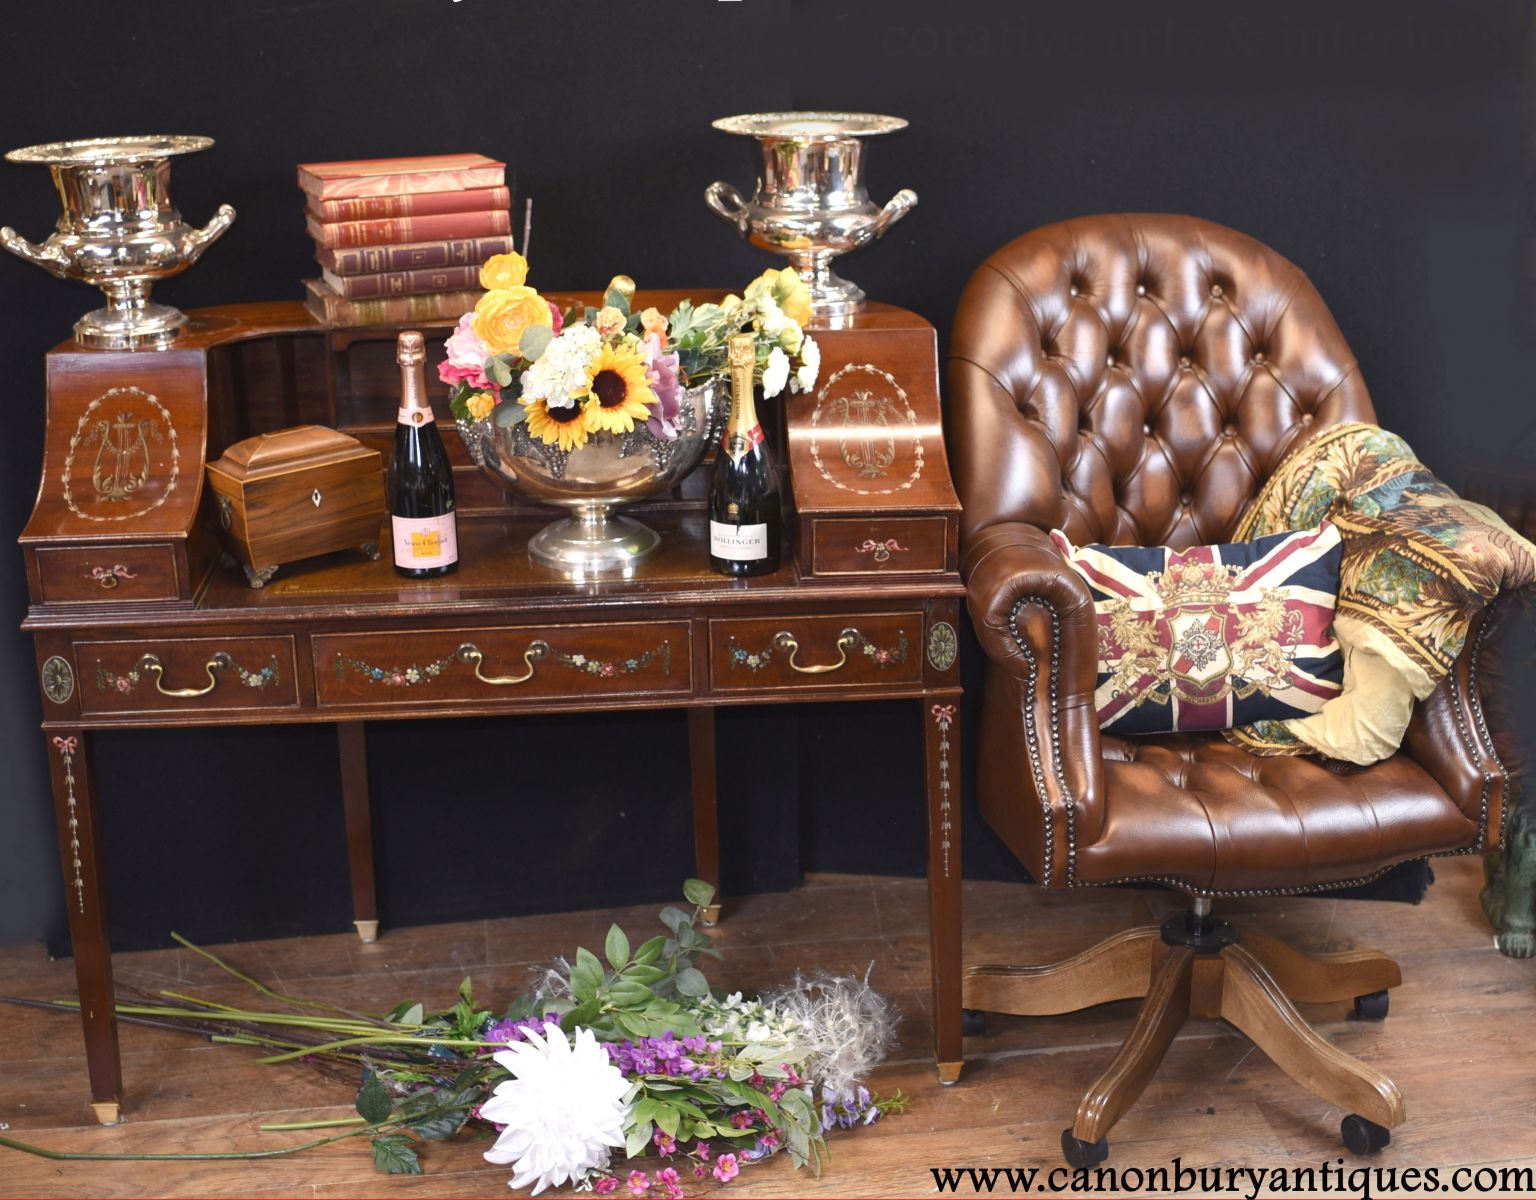 Antiques in St Albans - interiors and decorative arts